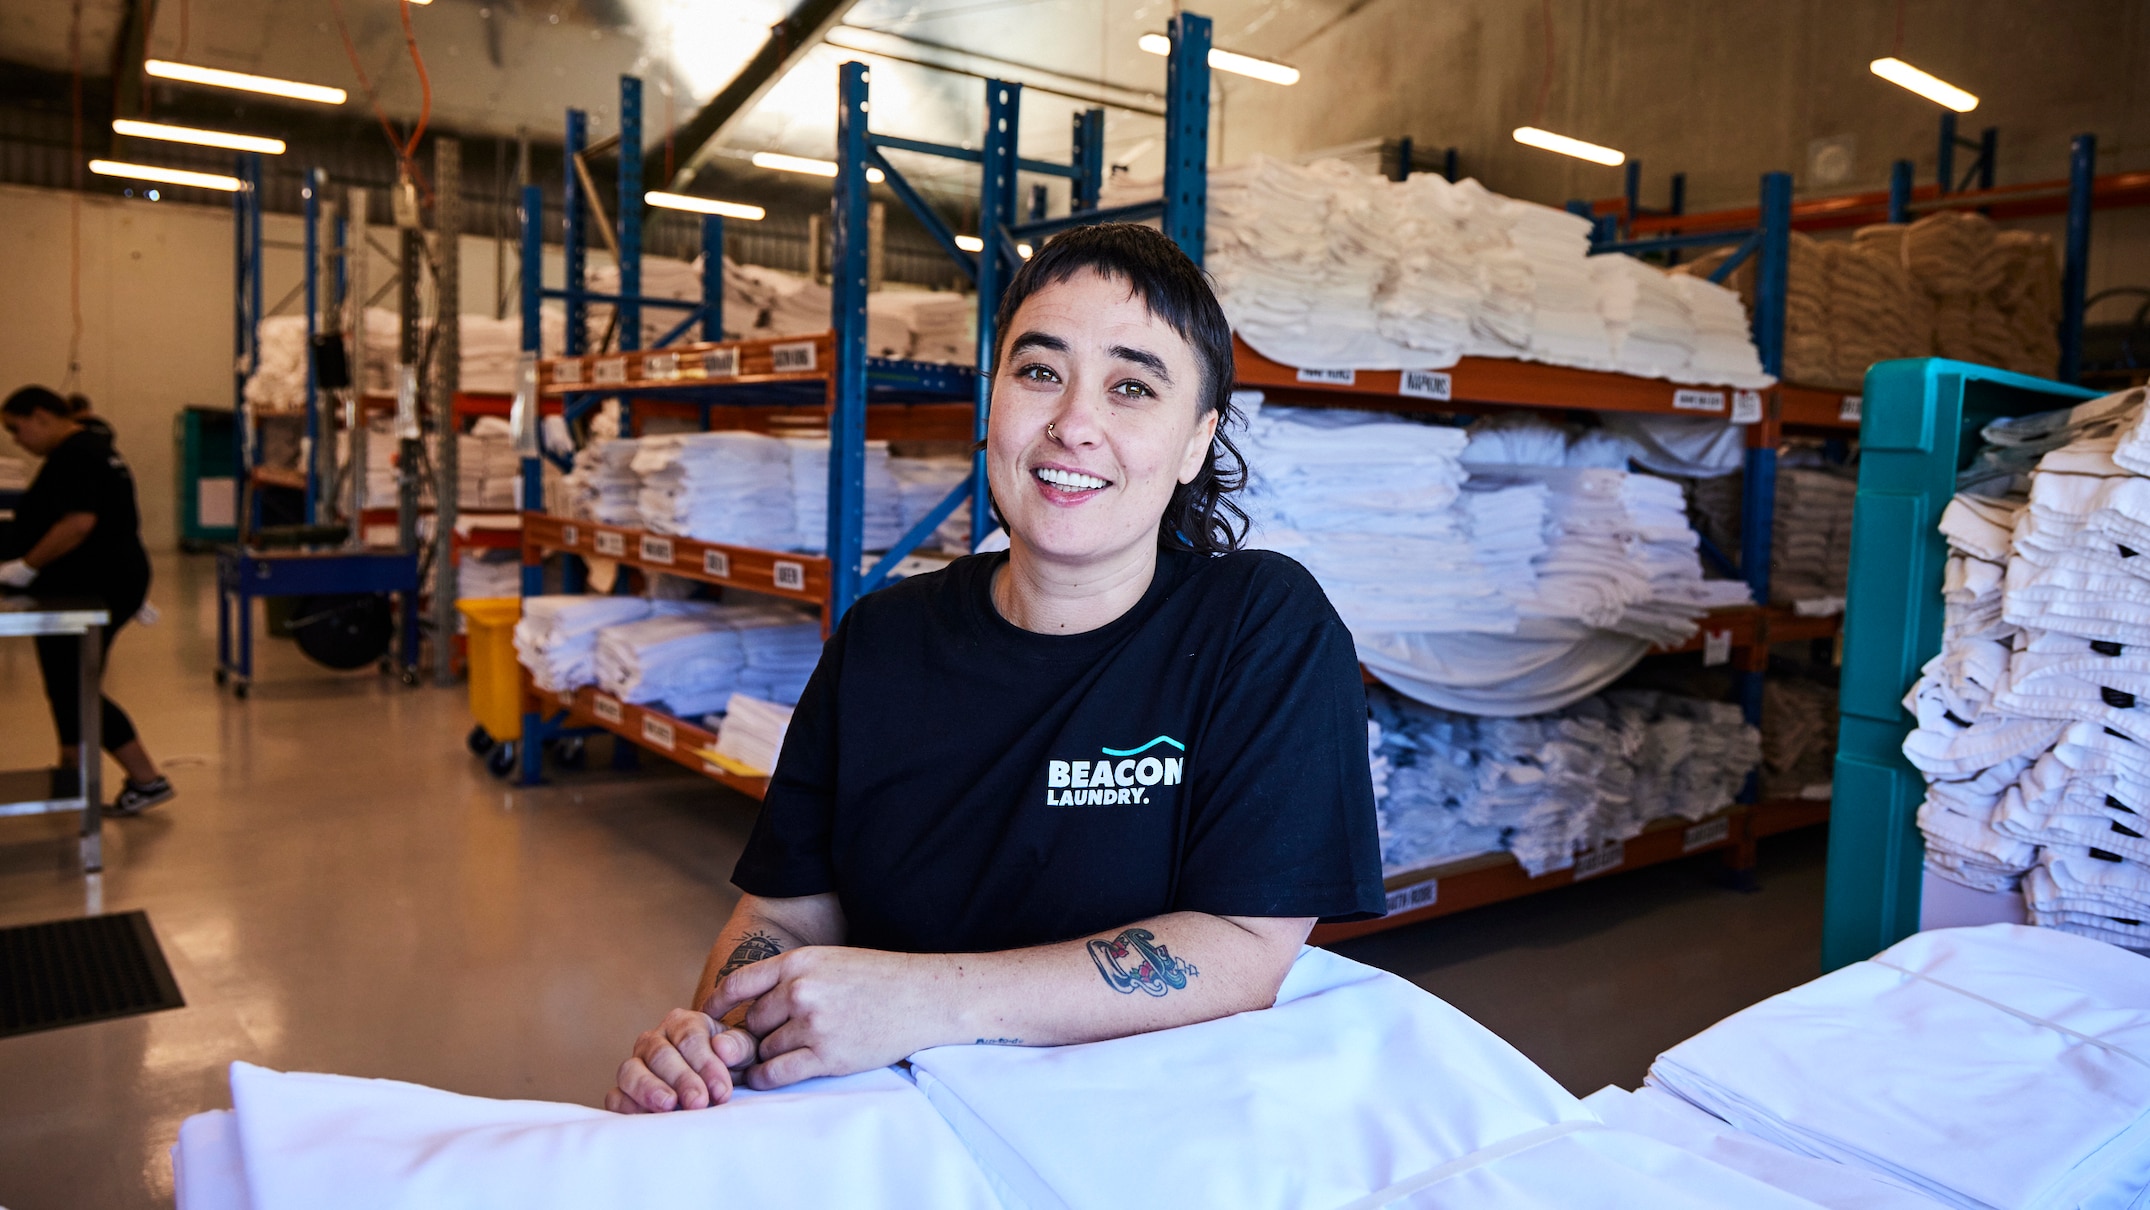 Mel Sass has been working at Beacon Laundry for 3 months. (Supplied: Beacon Laundry)